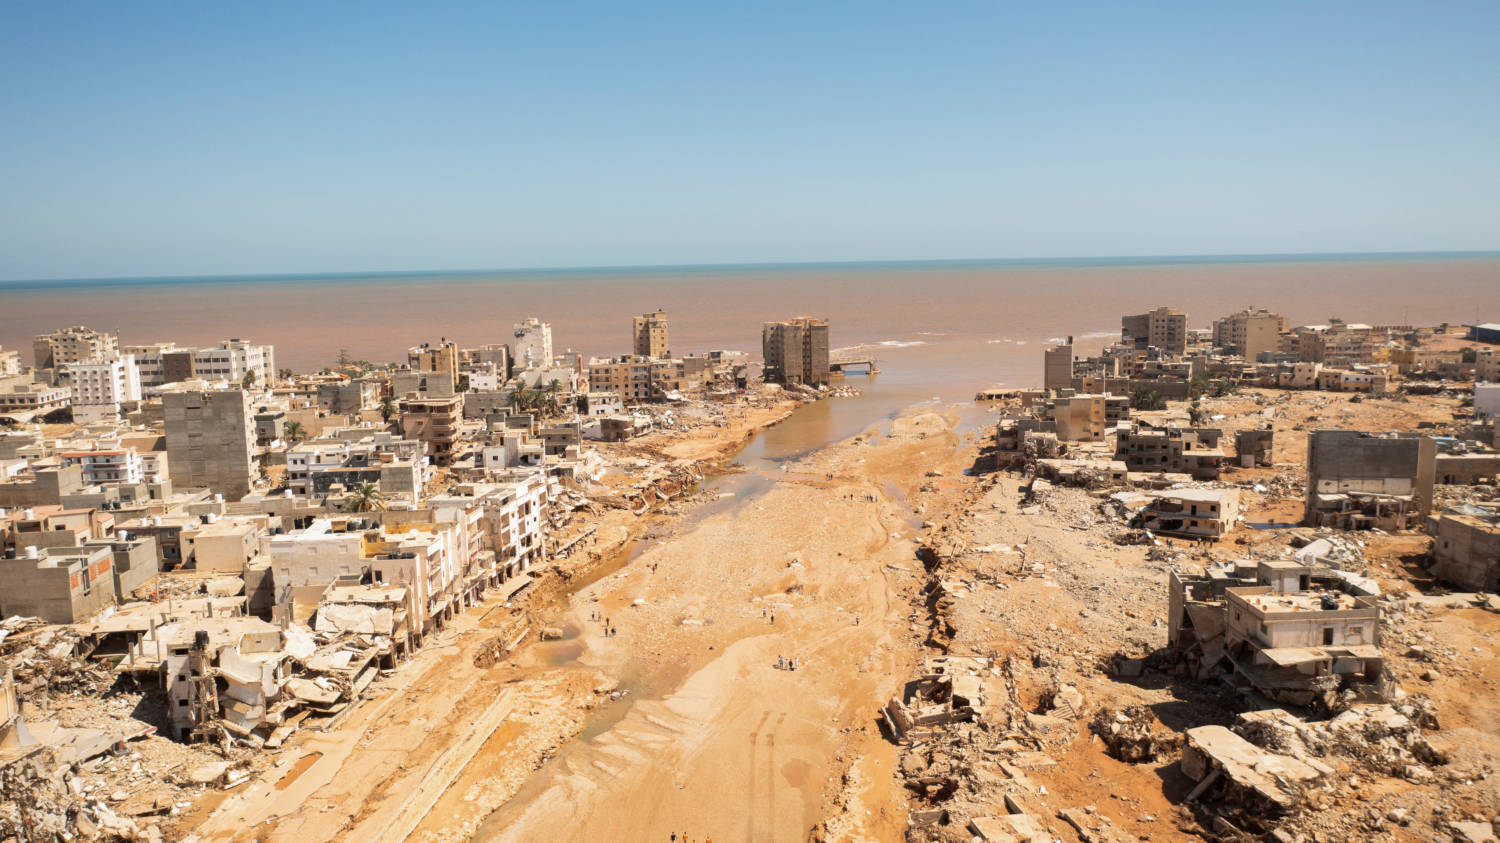 Flood: Libya’s city, Derna, struggles to cope with thousands of corpses